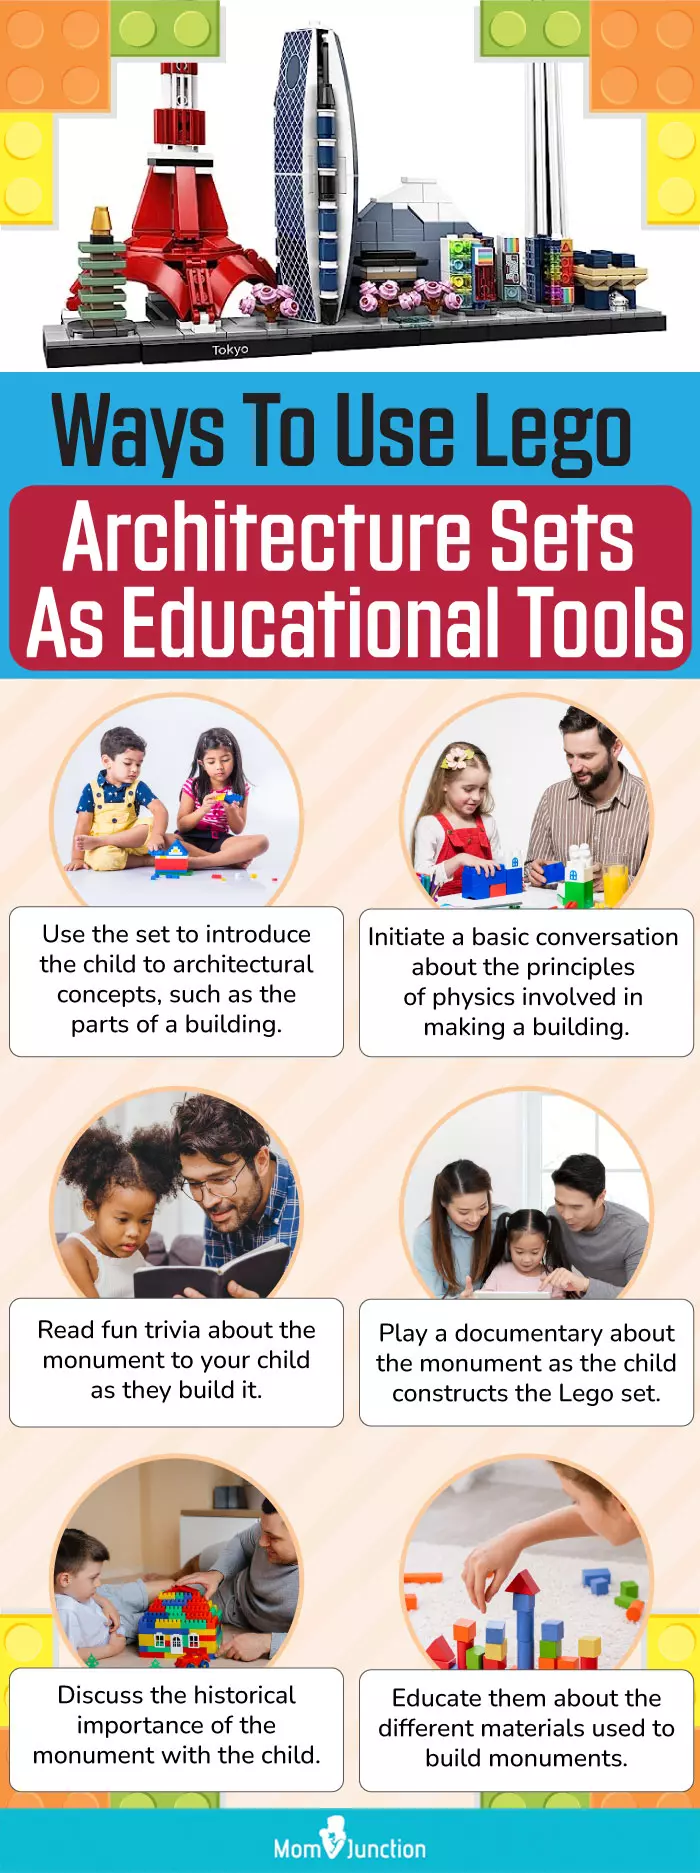 Ways To Use Lego Architecture Sets As Educational Tools (infographic)